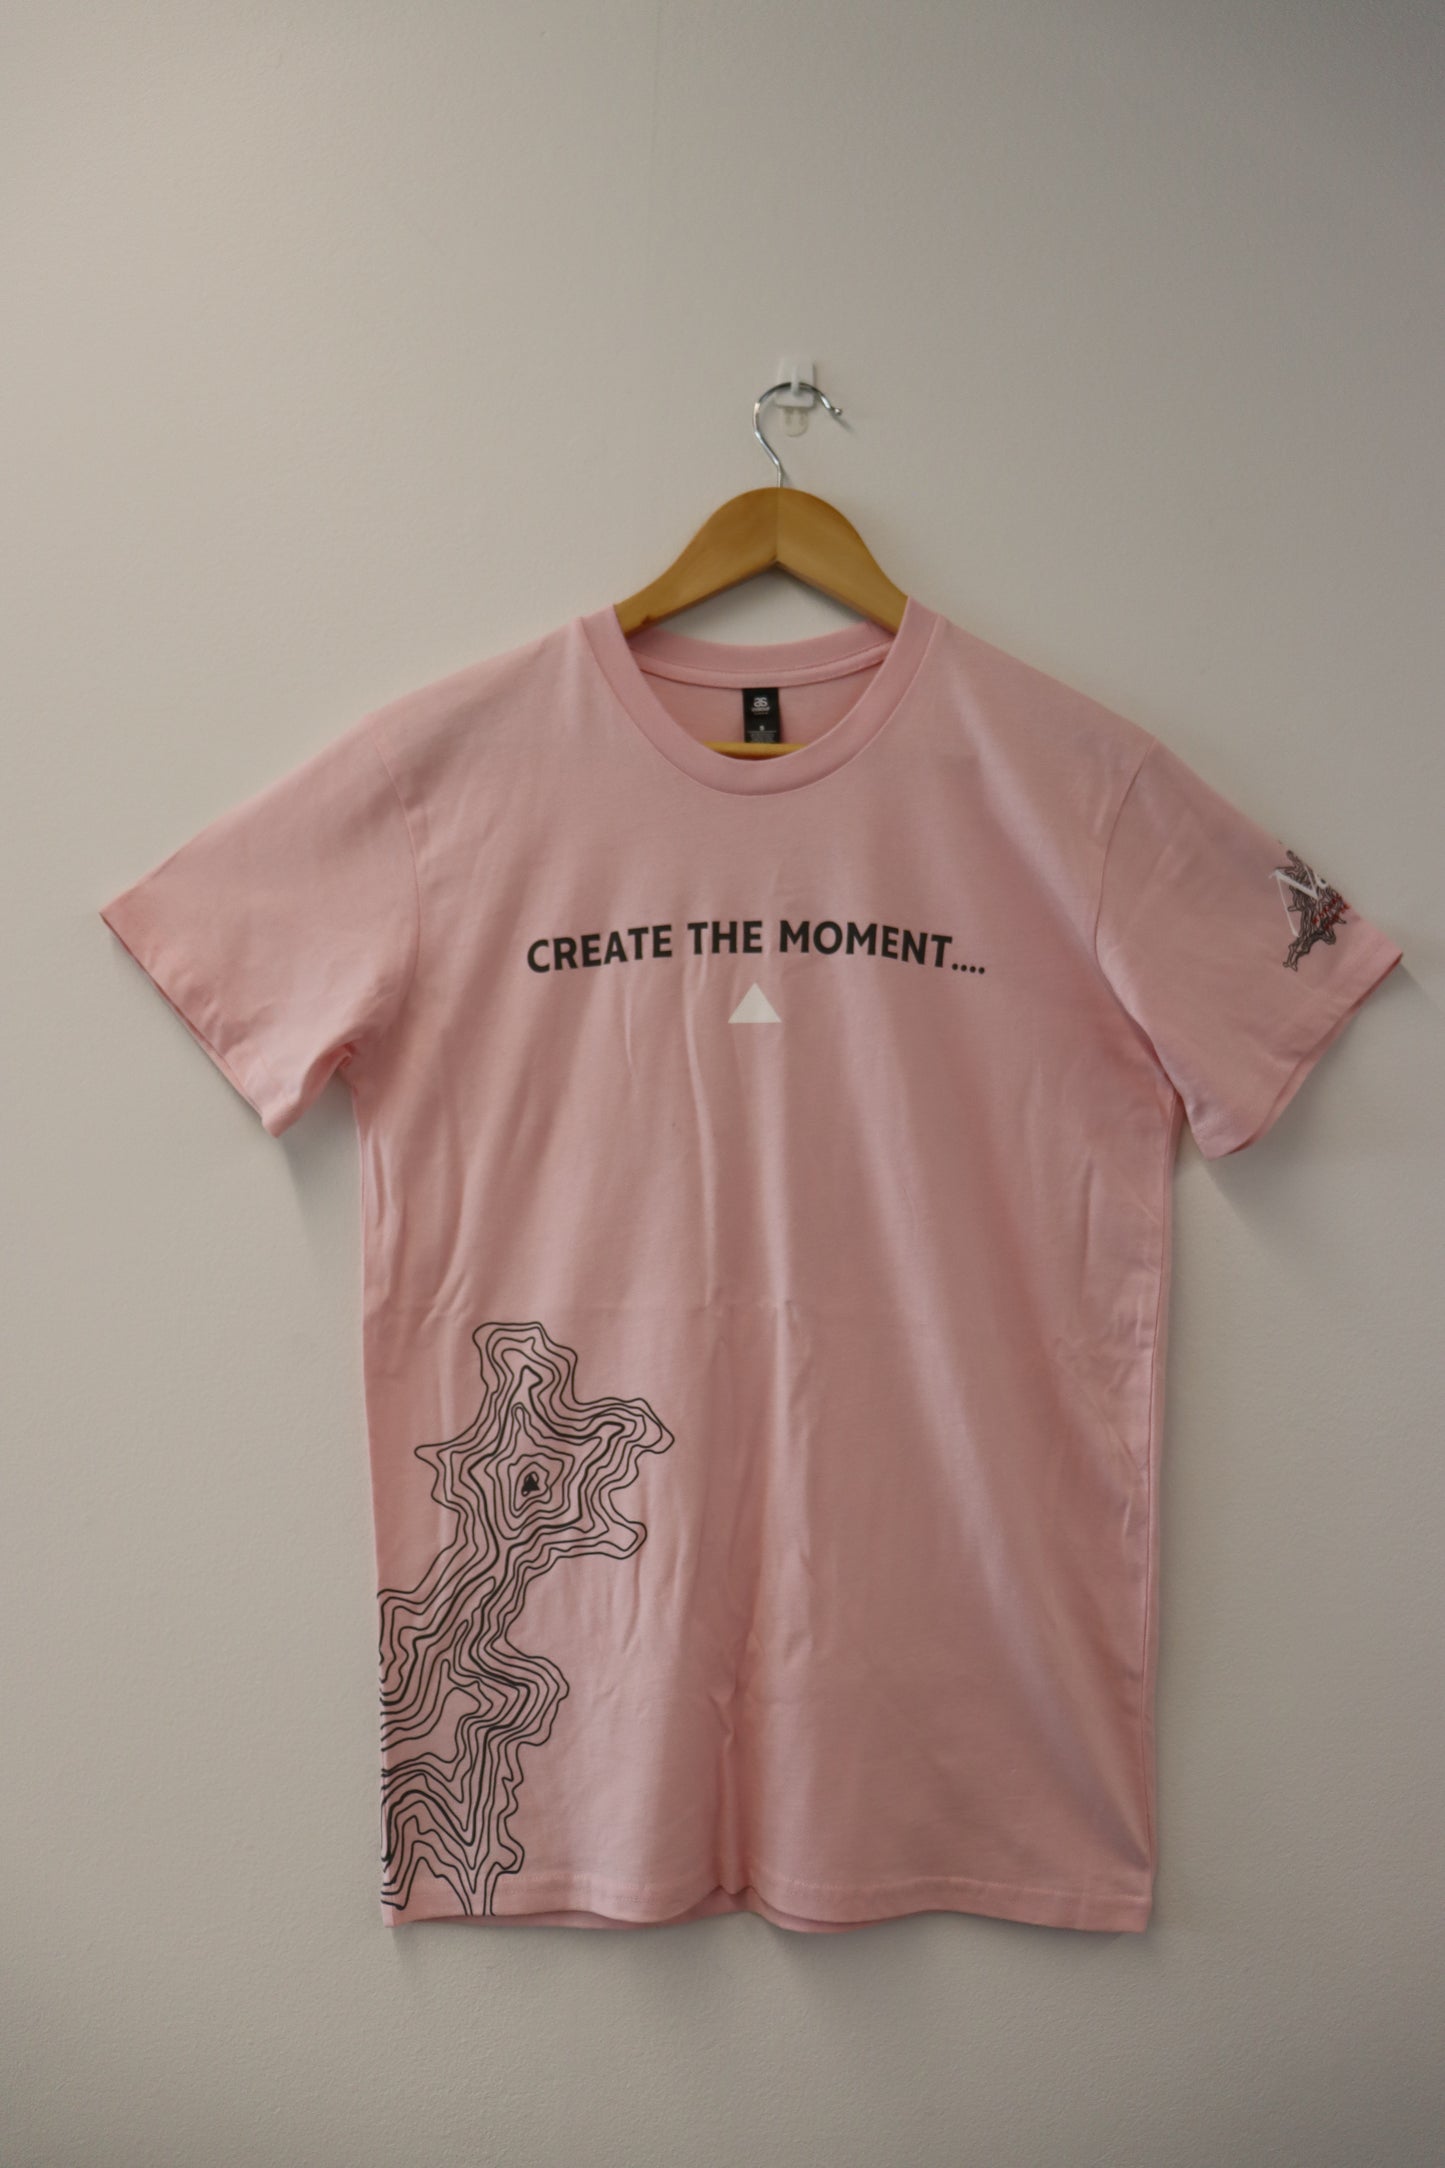 CREATE THE MOMENT T-SHIRT